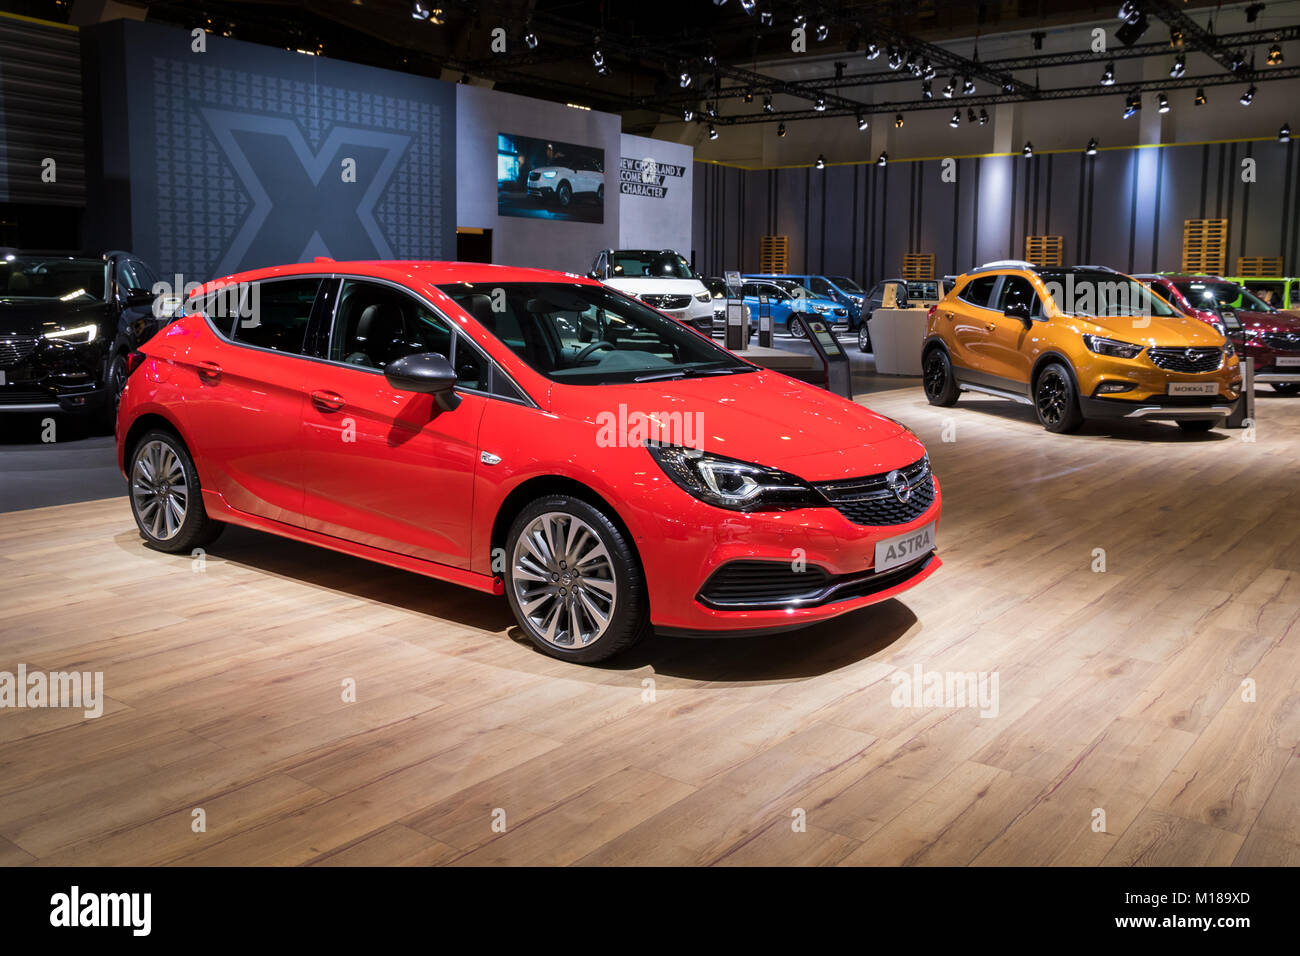 BRUSSELS - JAN 10, 2018: Opel Astra car shown at the Brussels Motor Show. Stock Photo